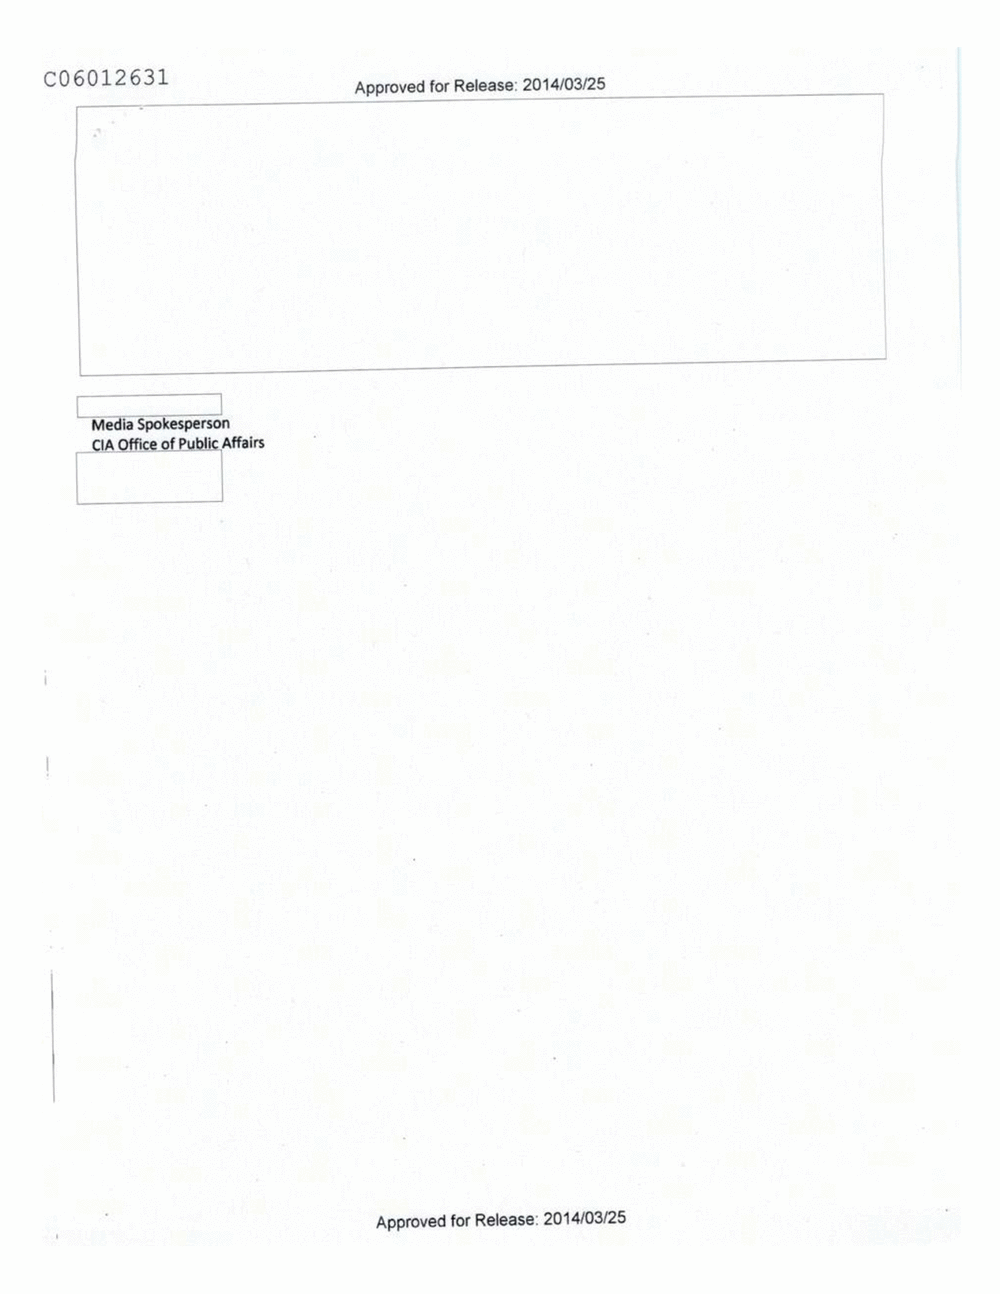 Page 190 from Email Correspondence Between Reporters and CIA Flacks